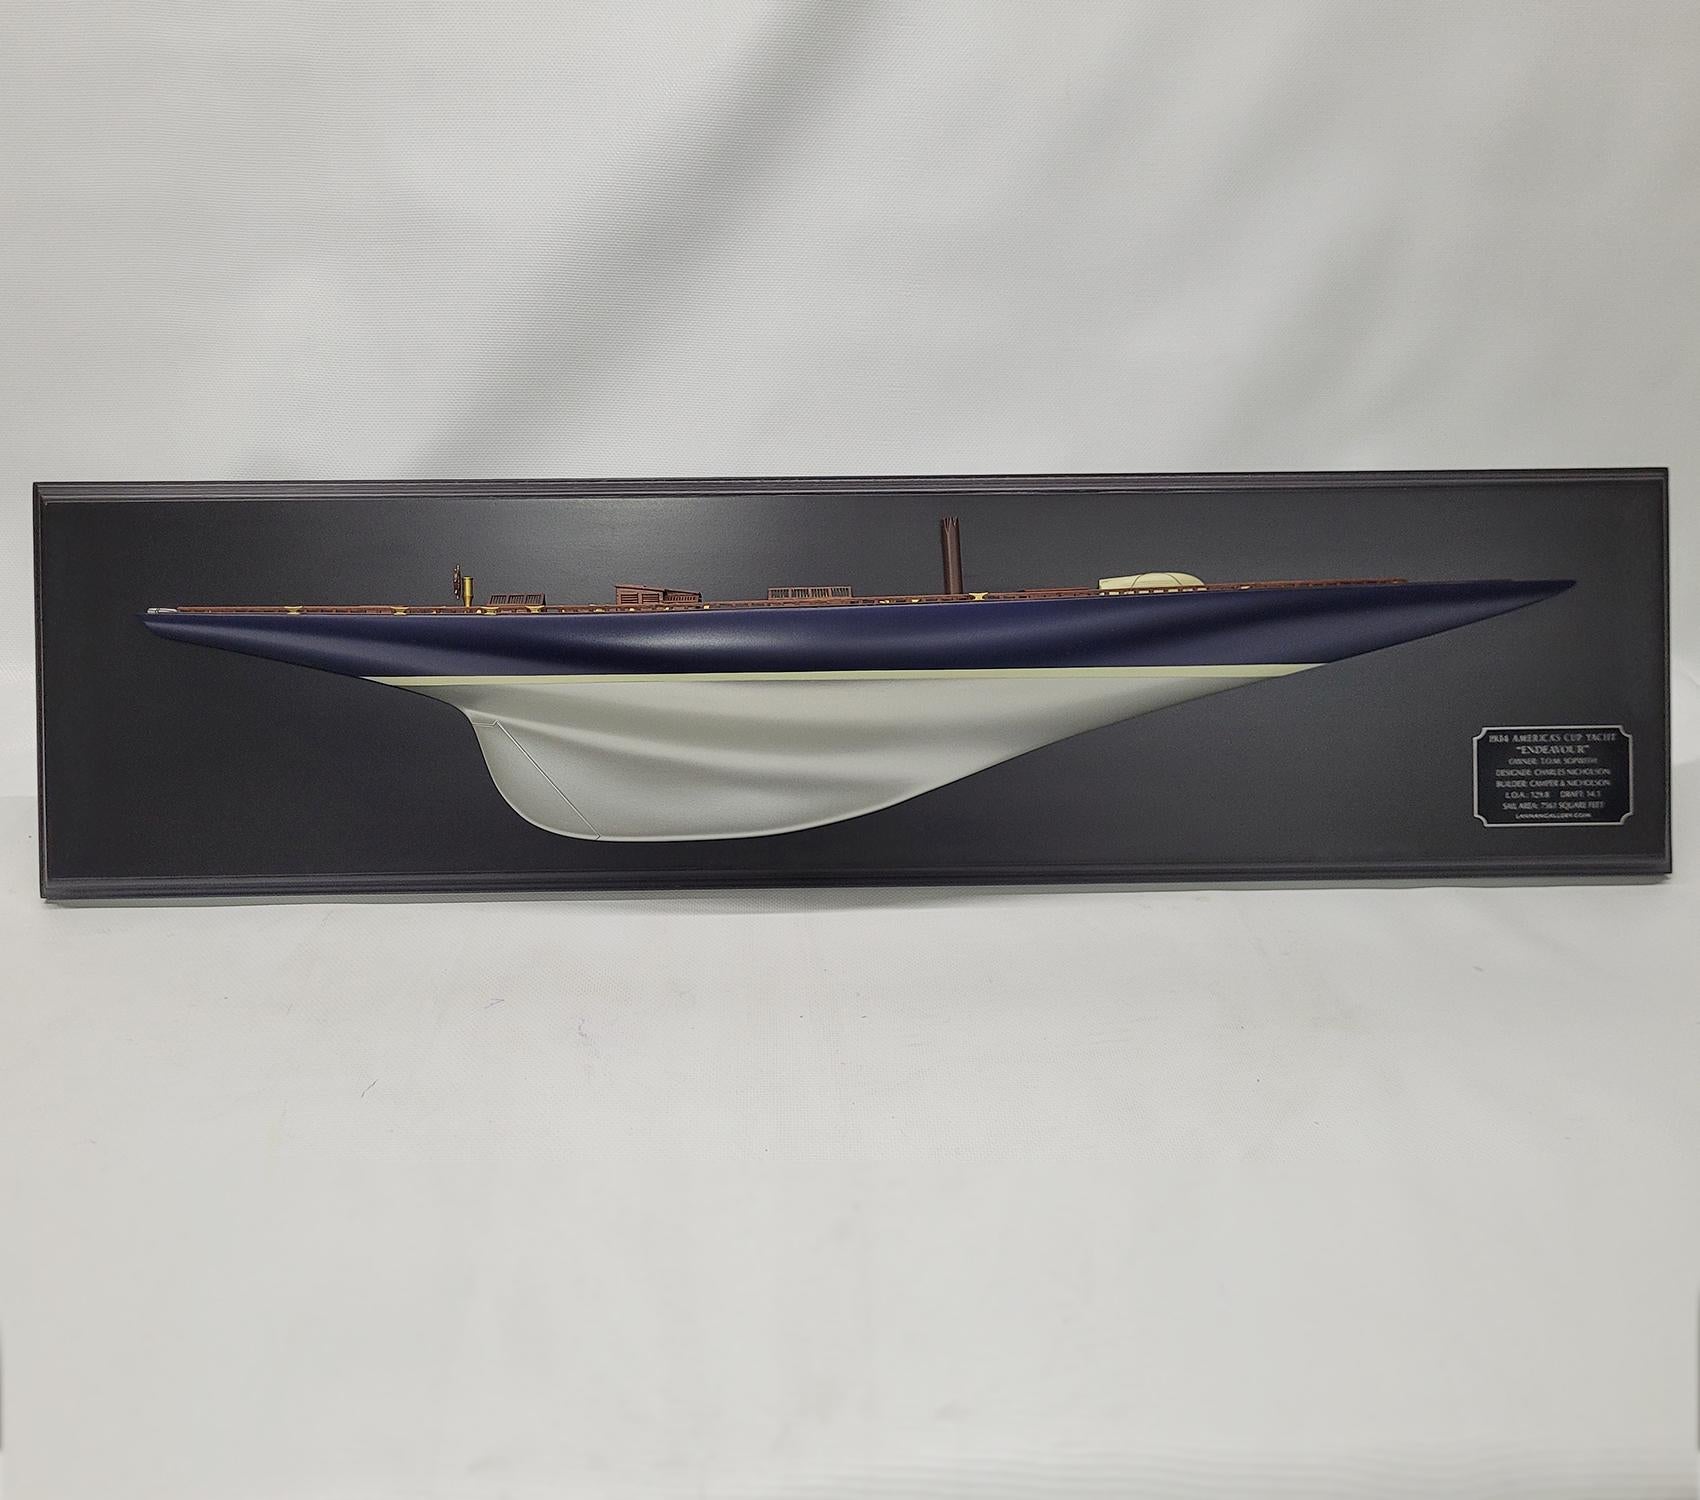 Half model of the America’s cup Yacht Endeavor. This is a 3-foot hull mounted to a blackboard. The hull is painted blue over silver. The planked deck has skylights, Companion Way, Spinnaker pole, Lifeboat, Cleats, Toe rail, Etc. Mounted to a